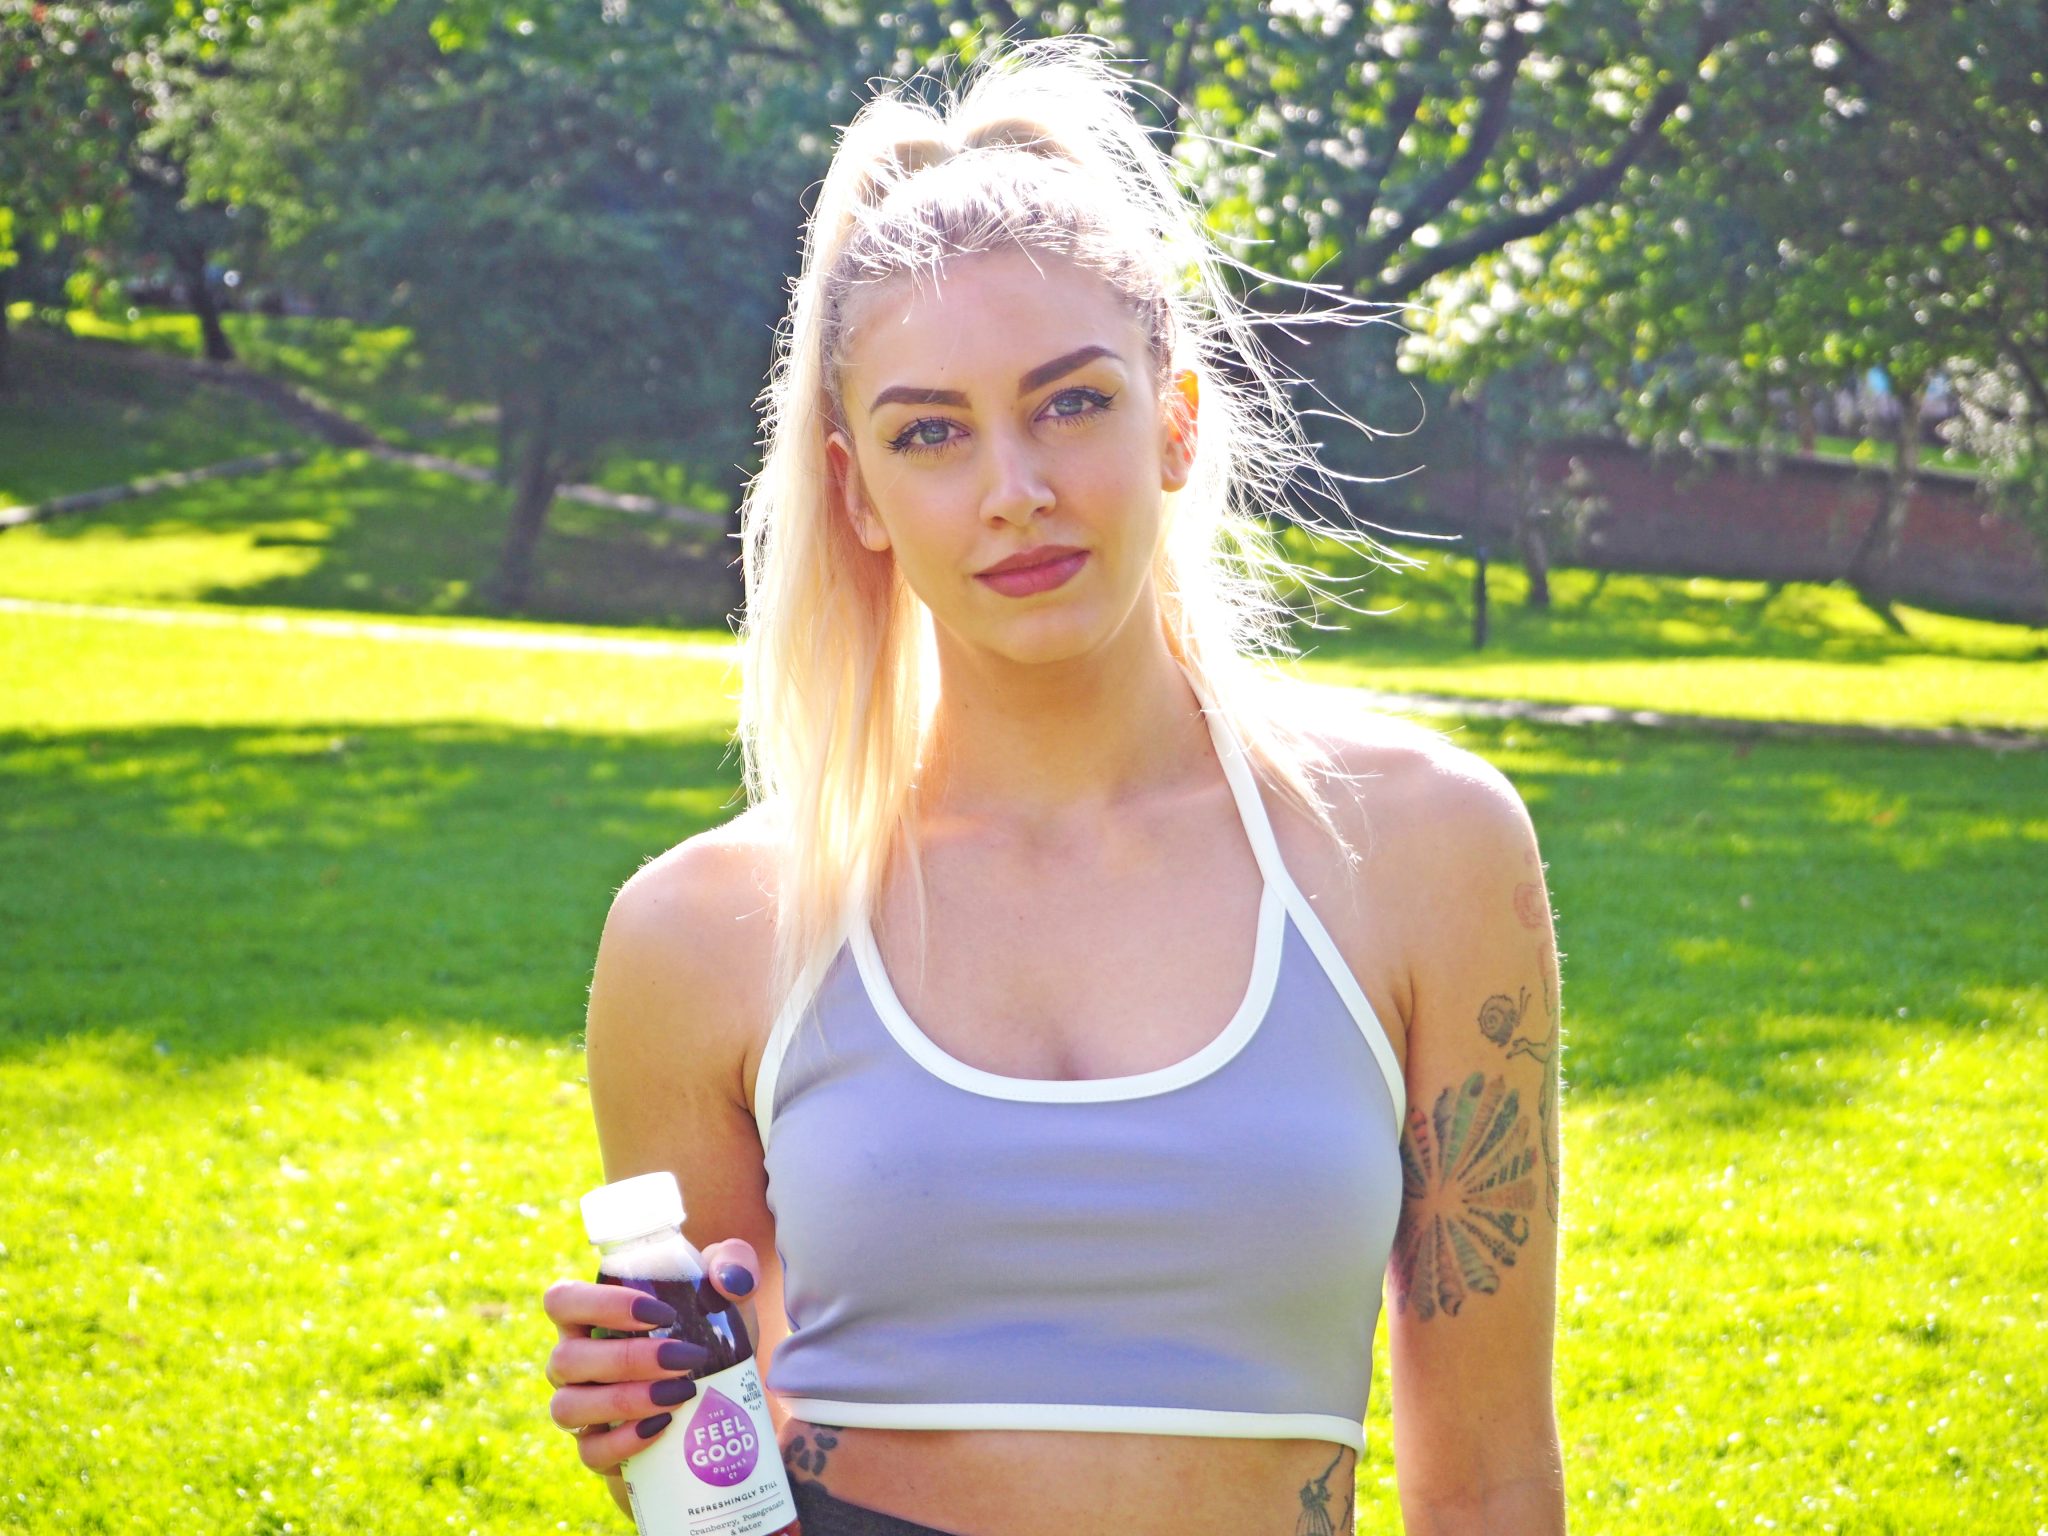 Laura Kate Lucas - Manchester Fashion, Fitness and Food Blogger | #FeelGoodSummer Campaign with Feel Good Drinks - Hydrating with Naturally Healthy Flavoured Water